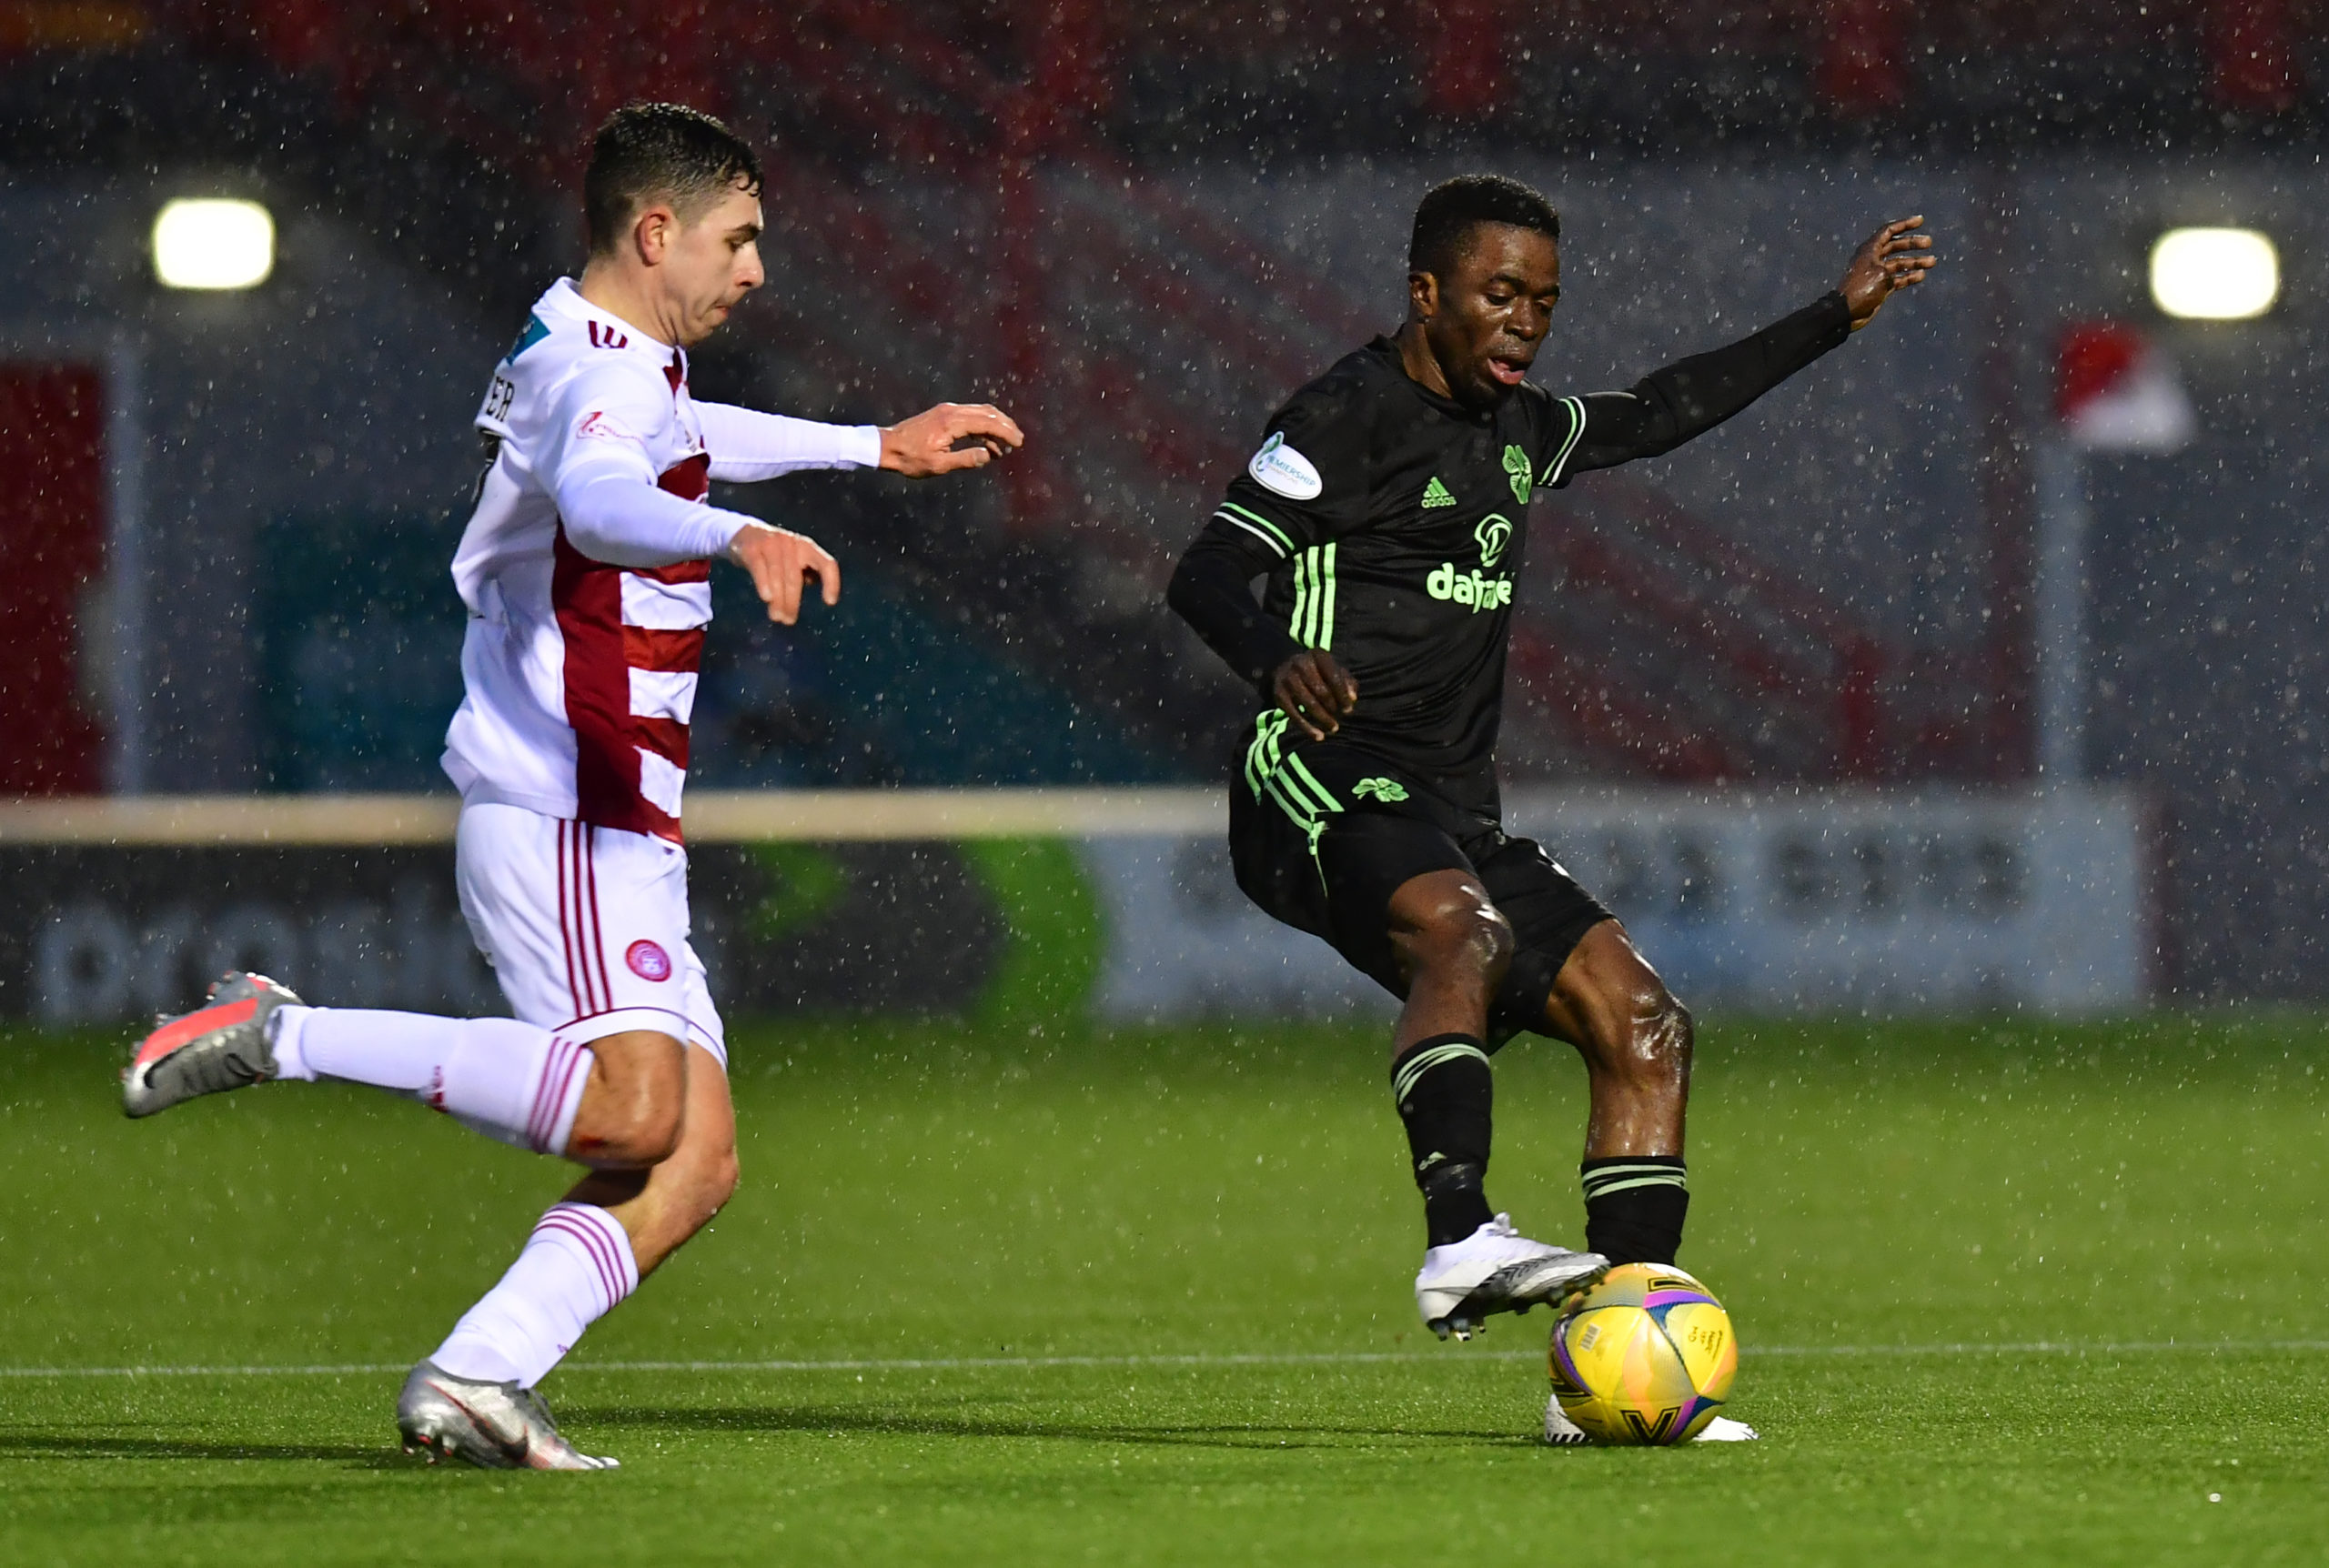 Celtic fans demand Ismaila Soro starts derby; Lennon must make the right call